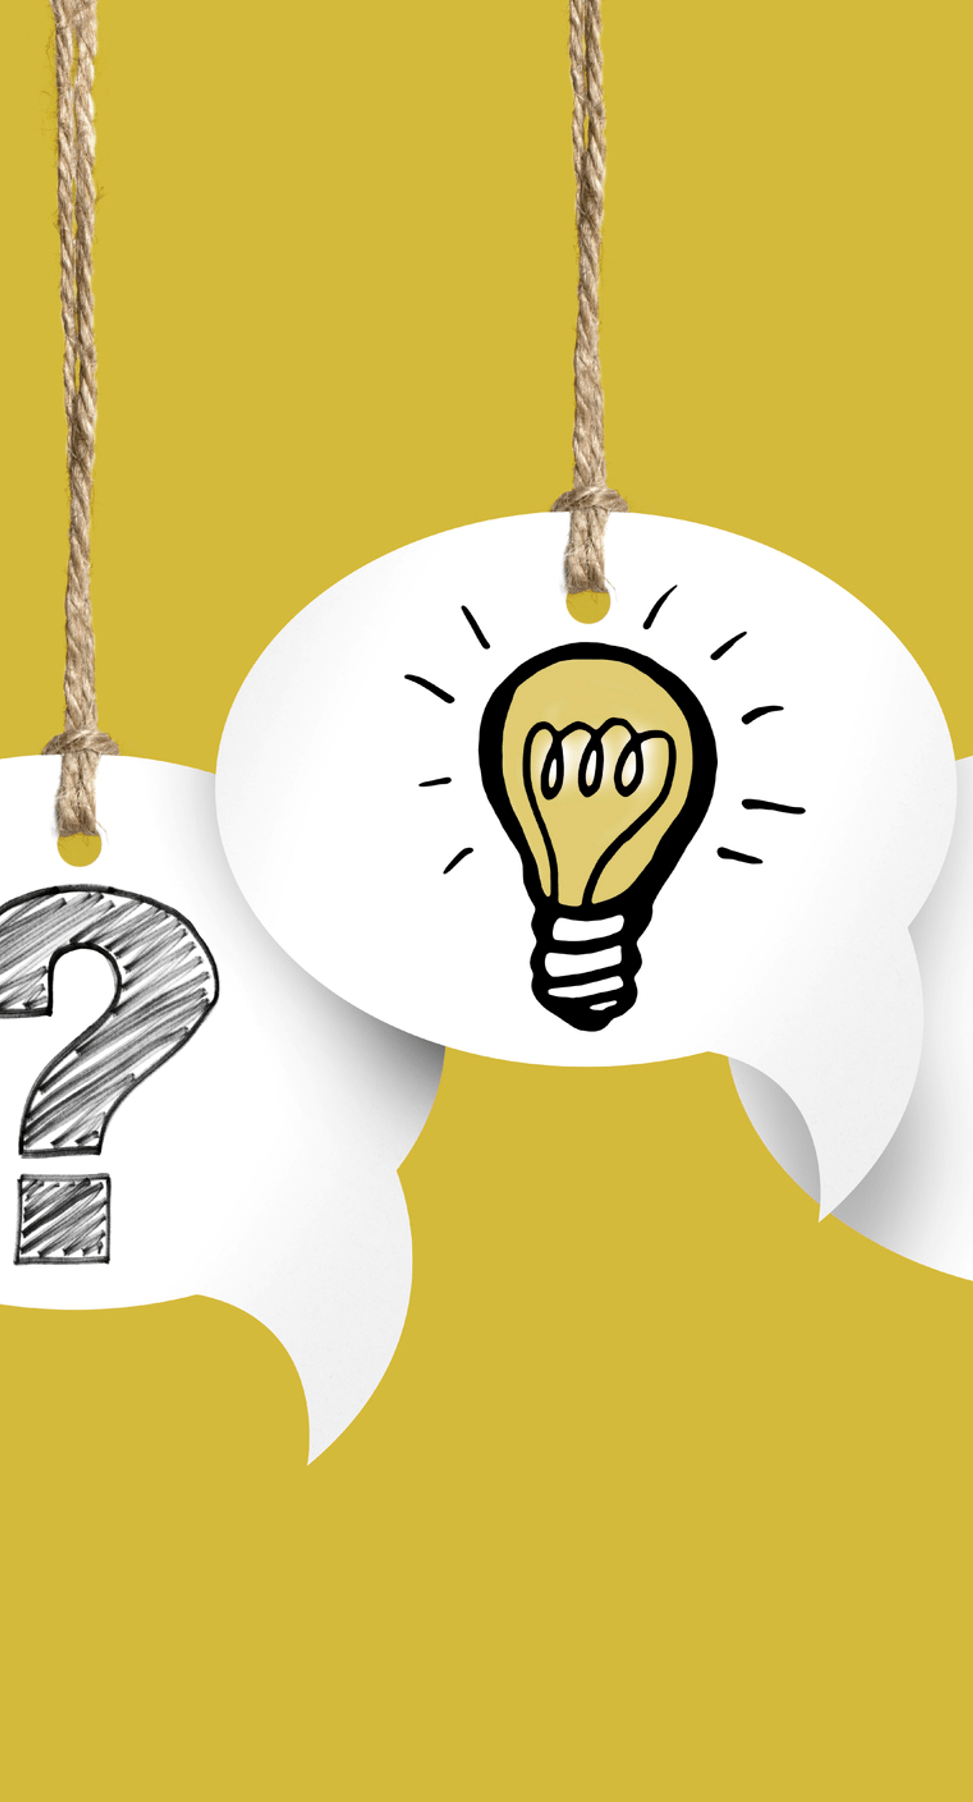 Stock image of speech bubbles hanging on string with a question mark and lightbulb drawn on them.